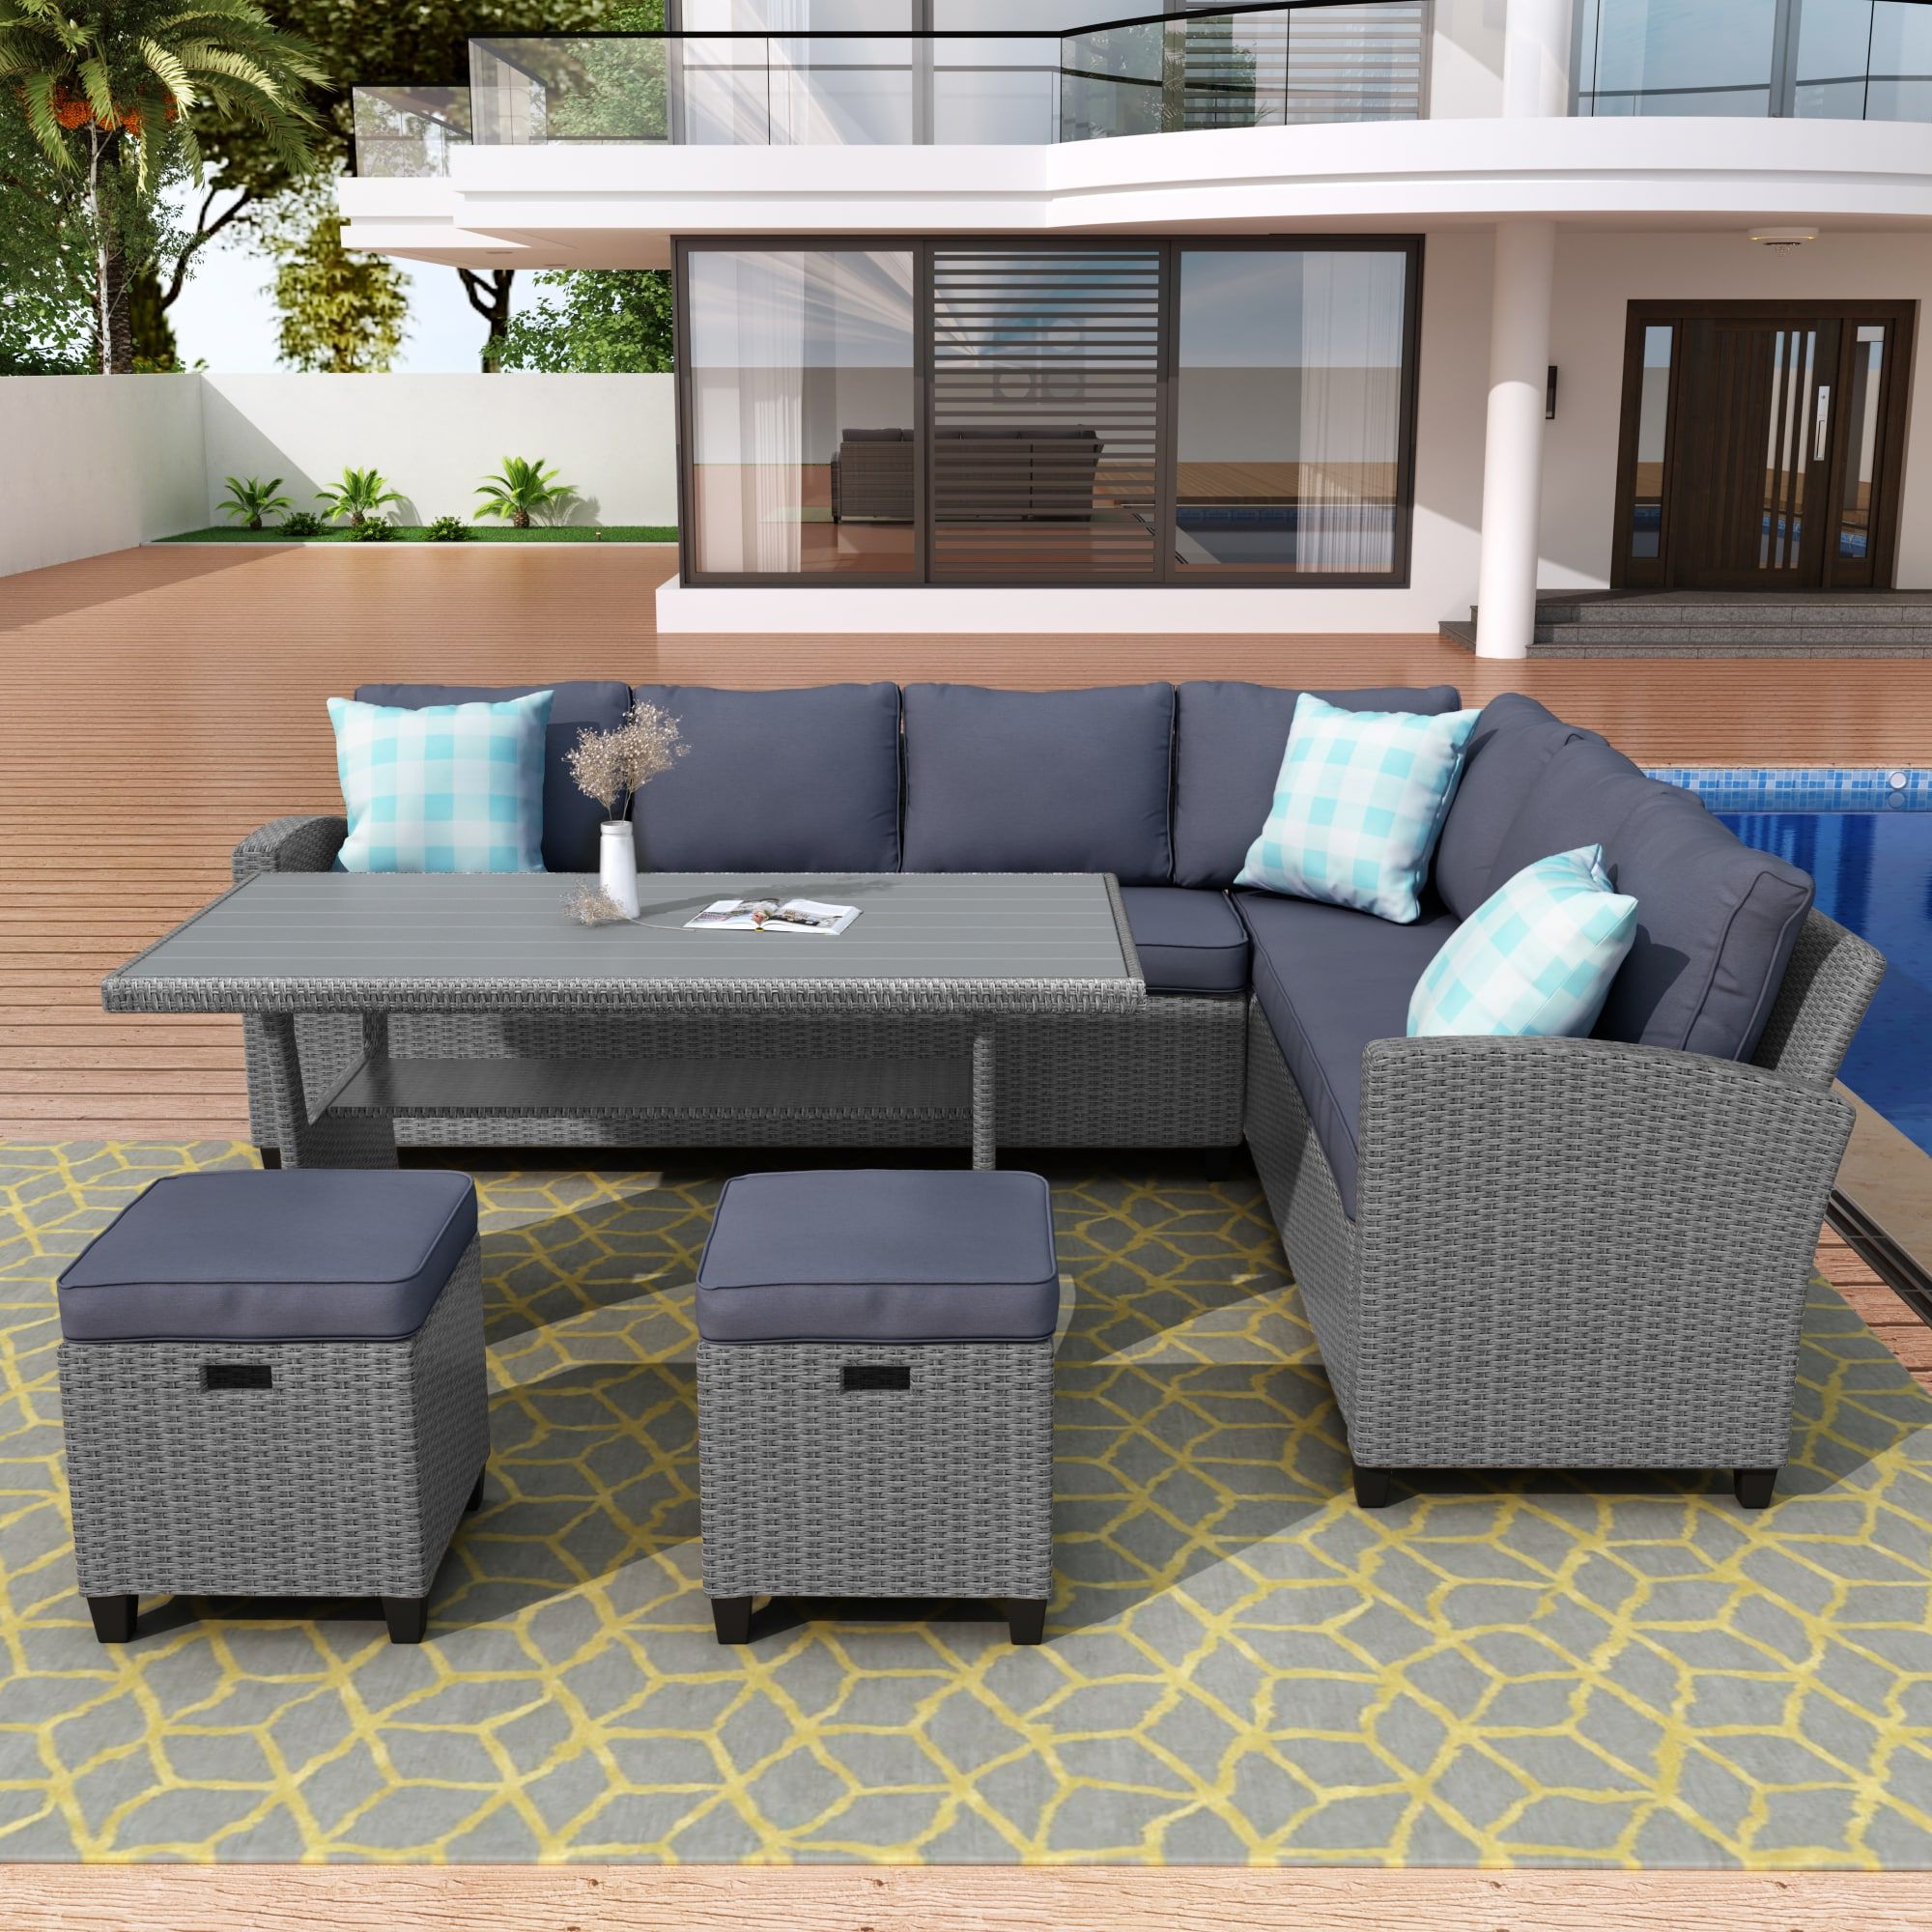 5 Piece Patio Conversation Set With Regard To Most Up To Date Clihome 5 Piece Patio Conversation Set 5 Piece Rattan Patio Conversation Set  With Gray Cushions In The Patio Conversation Sets Department At Lowes (Photo 7 of 15)